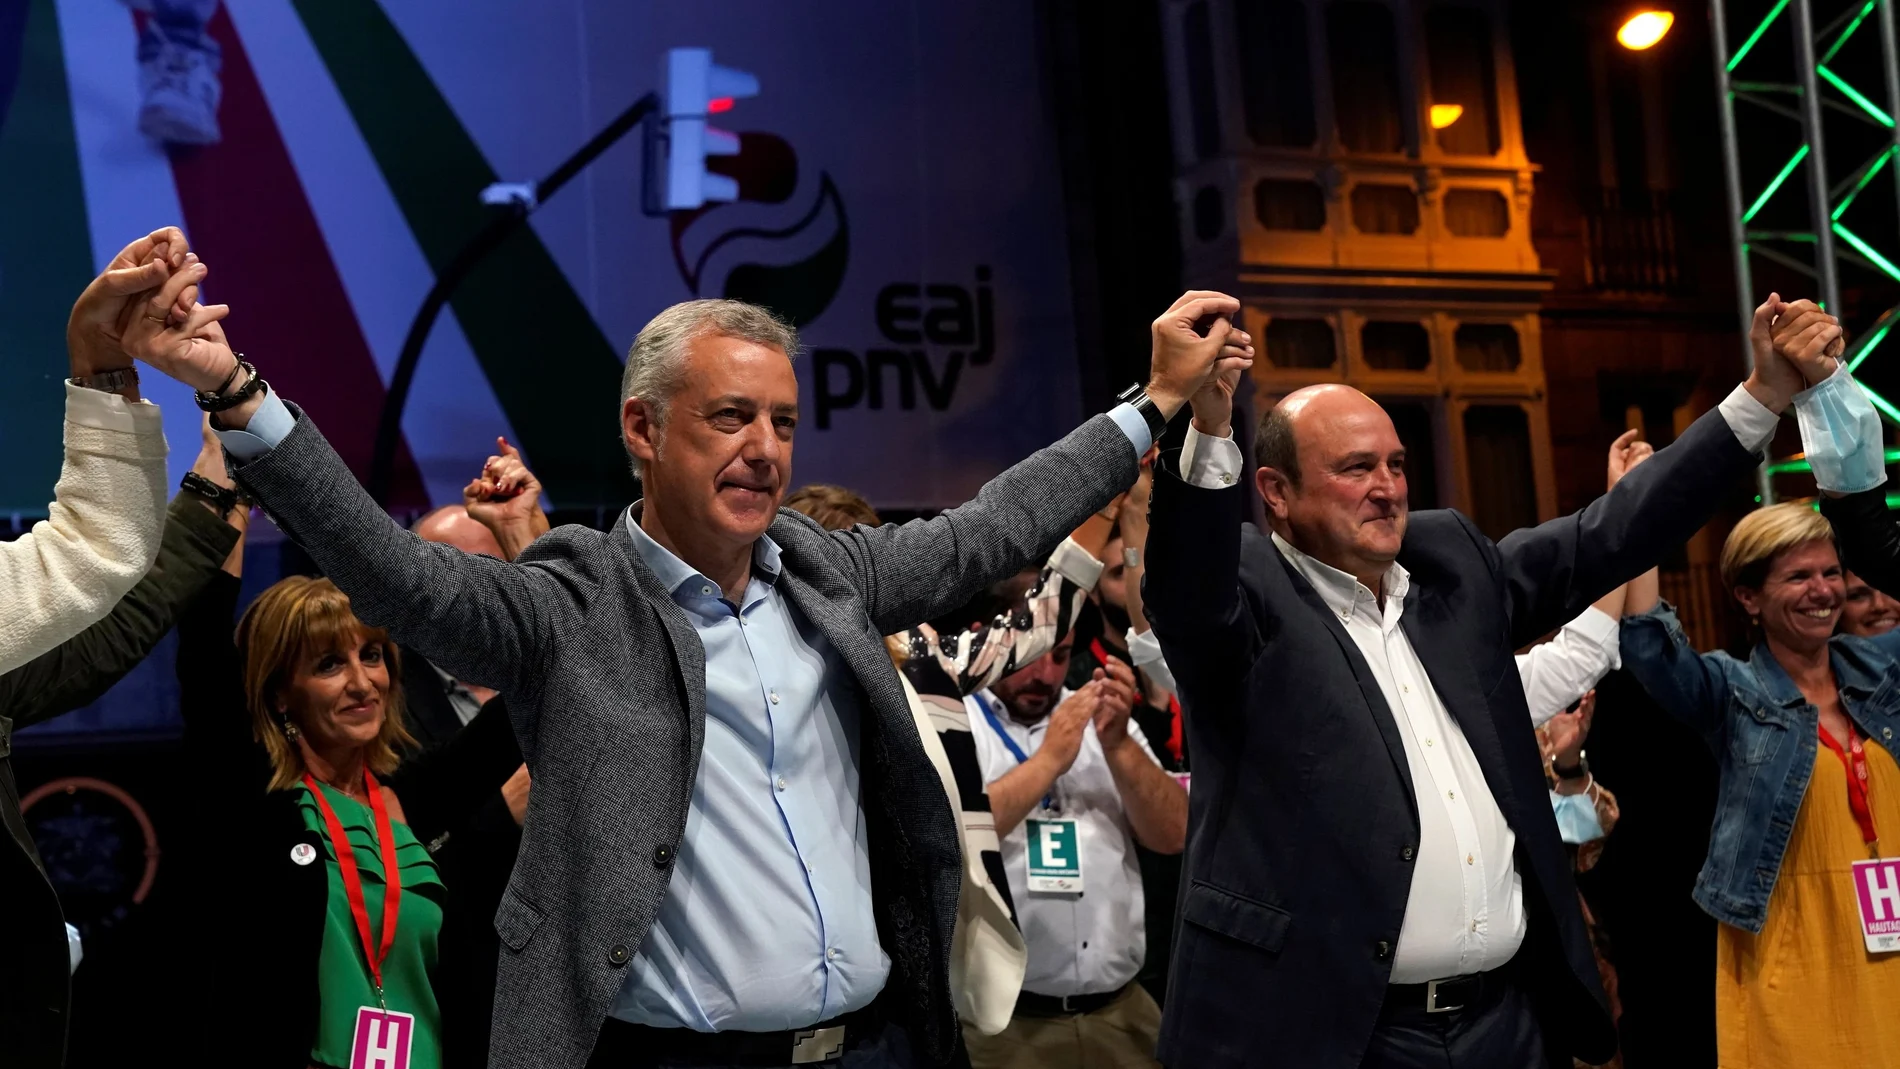 Basque premier Inigo Urkullu celebrates his party's victory in regional elections at Basque Nationalist Party (PNV) headquarters in Bilbao